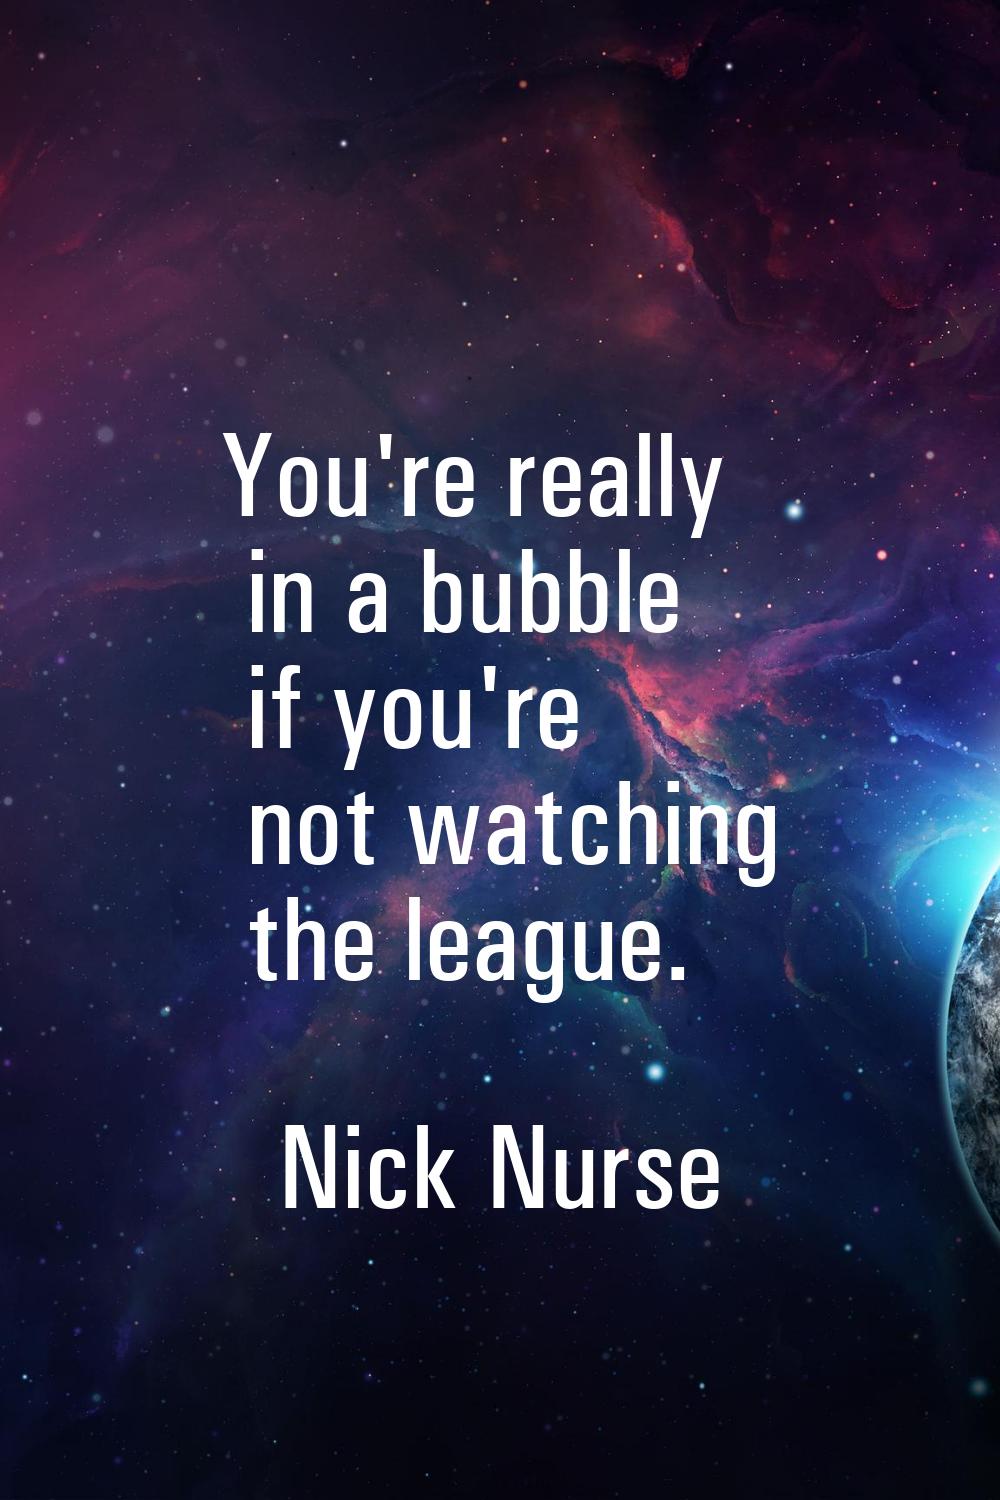 You're really in a bubble if you're not watching the league.